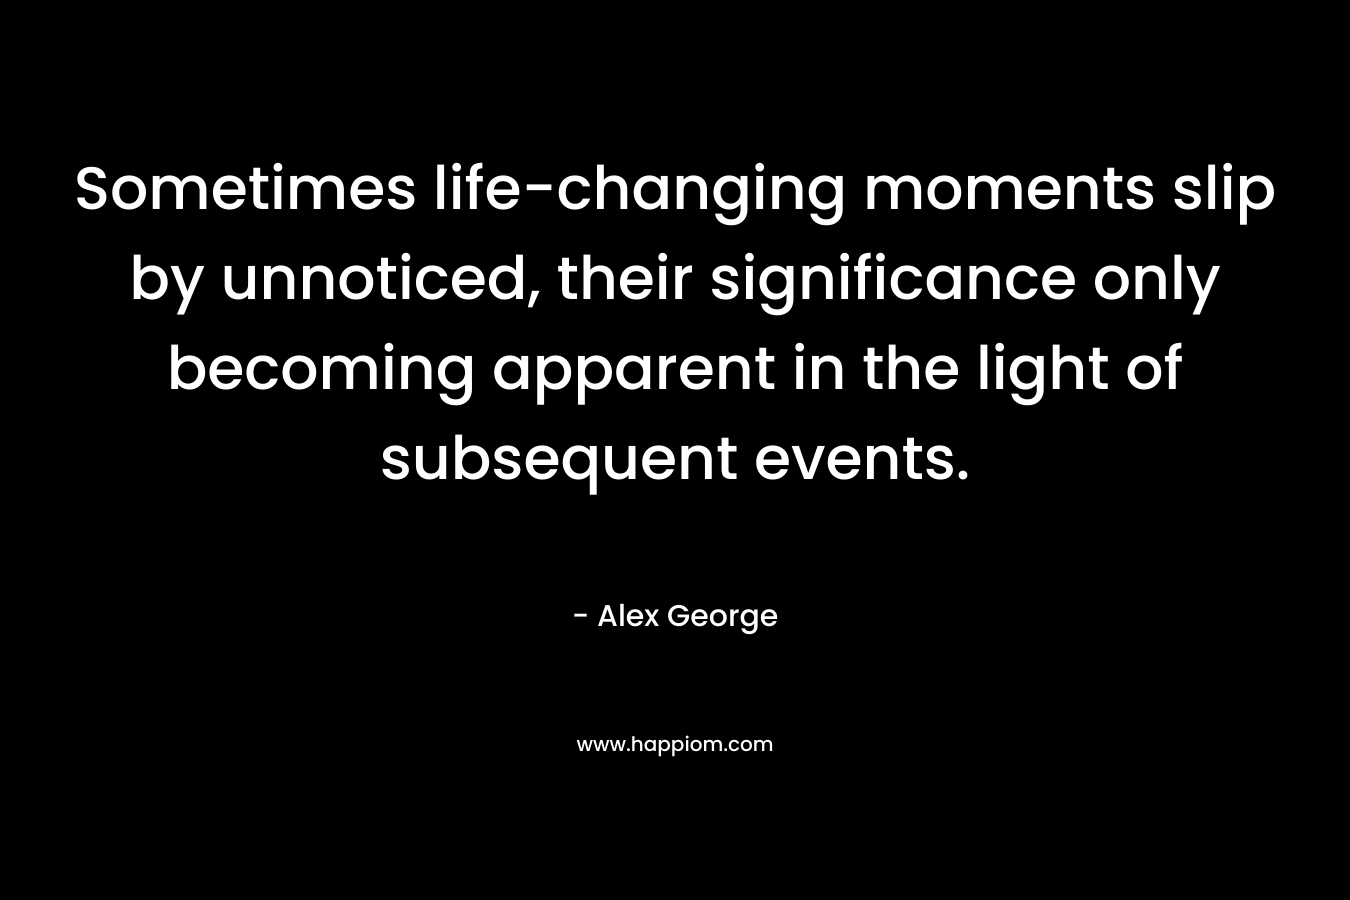 Sometimes life-changing moments slip by unnoticed, their significance only becoming apparent in the light of subsequent events. – Alex George